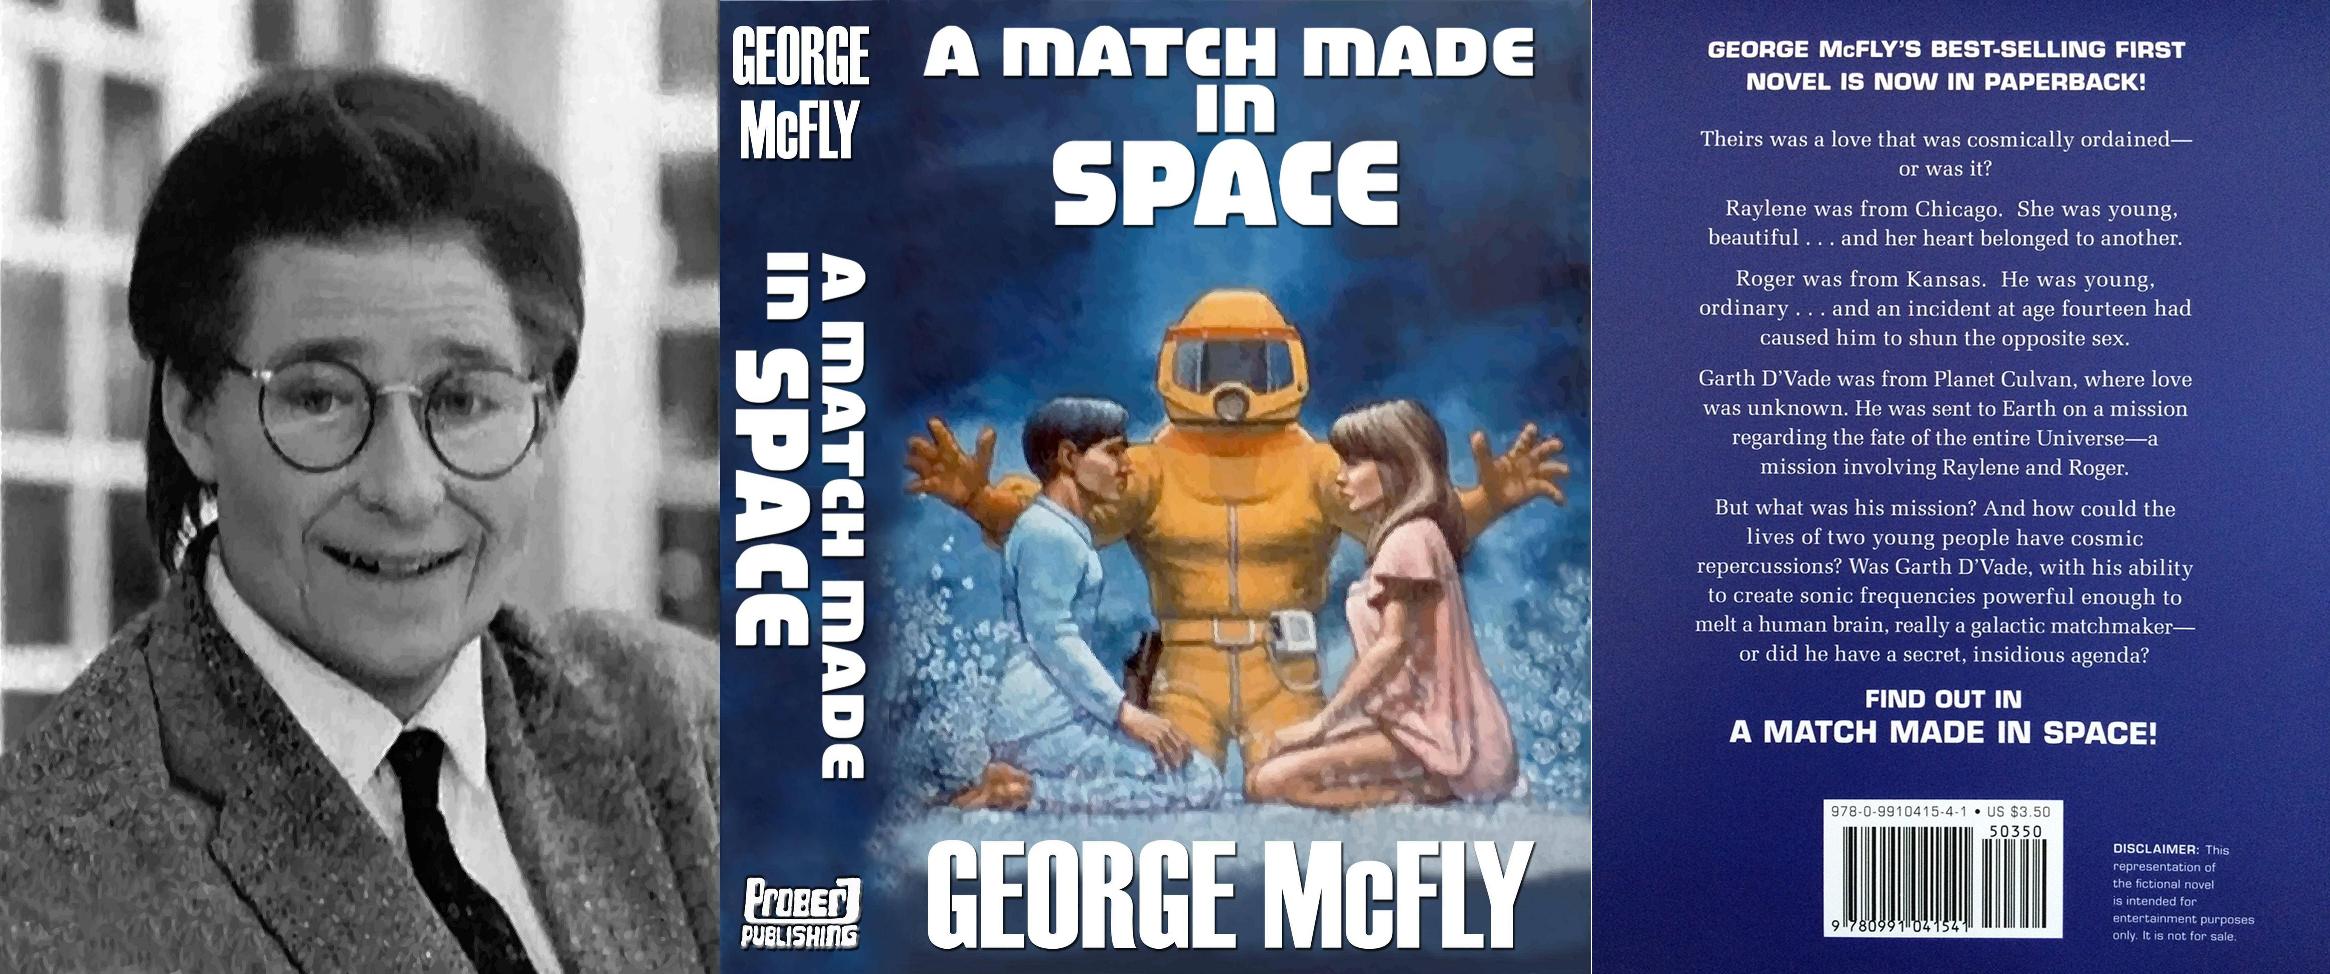 Match Made in Space